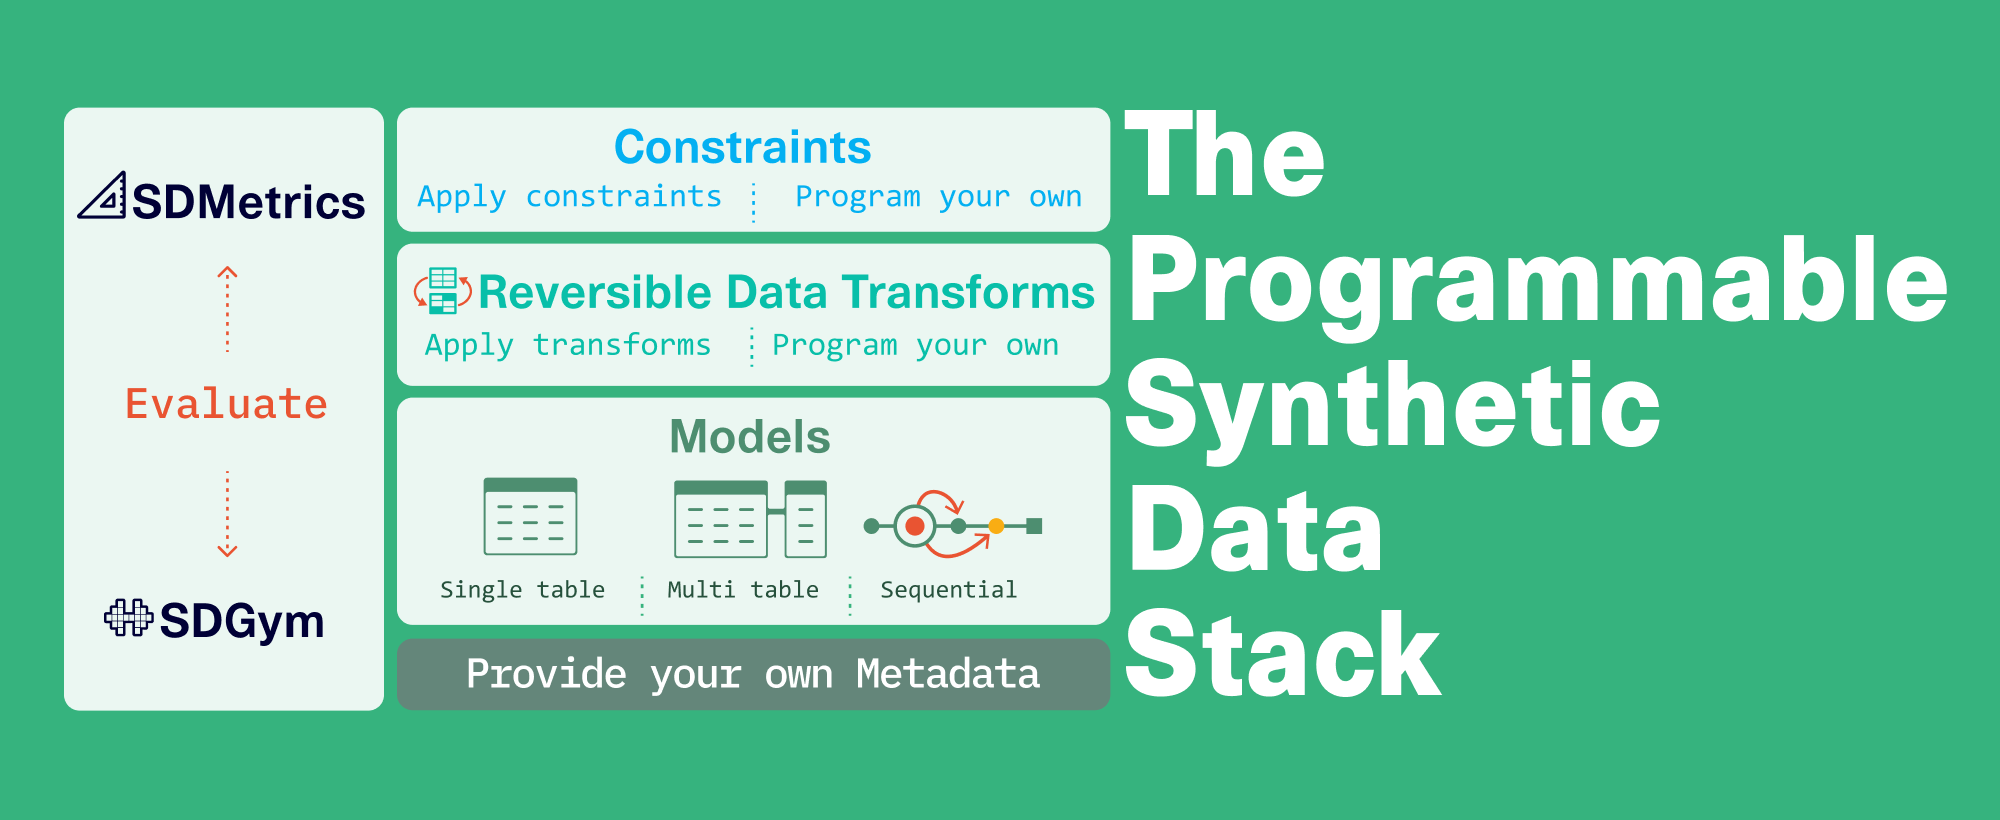 Announcing SDV 1.0: Towards programmable synthetic data stack